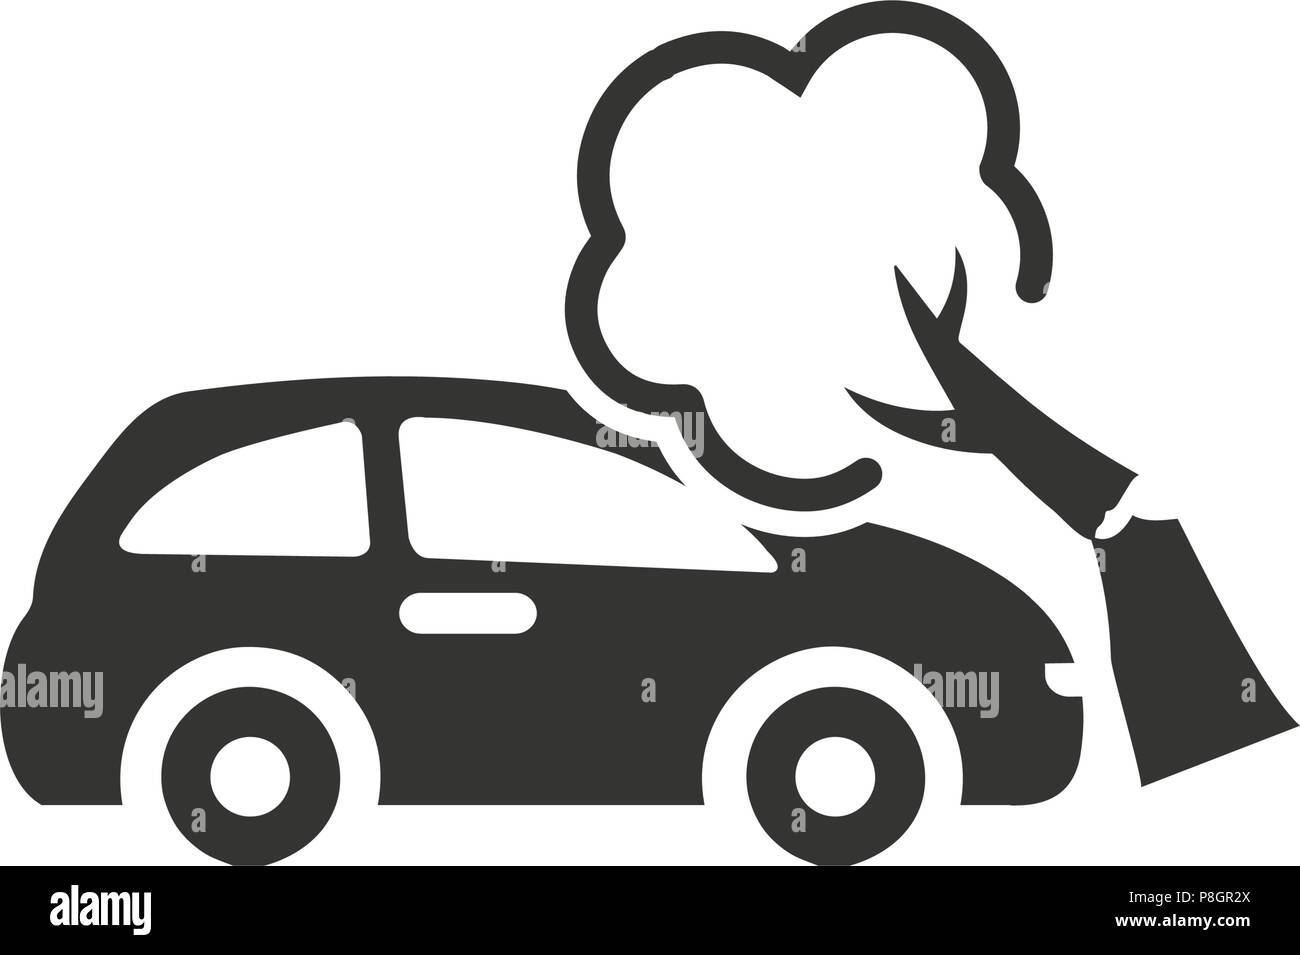 Overturned car or collision of cars pictogram. Cartoon car crash, accident  symbol or icon. Road, traffic accident. Crashed cars or service logo. -  SuperStock